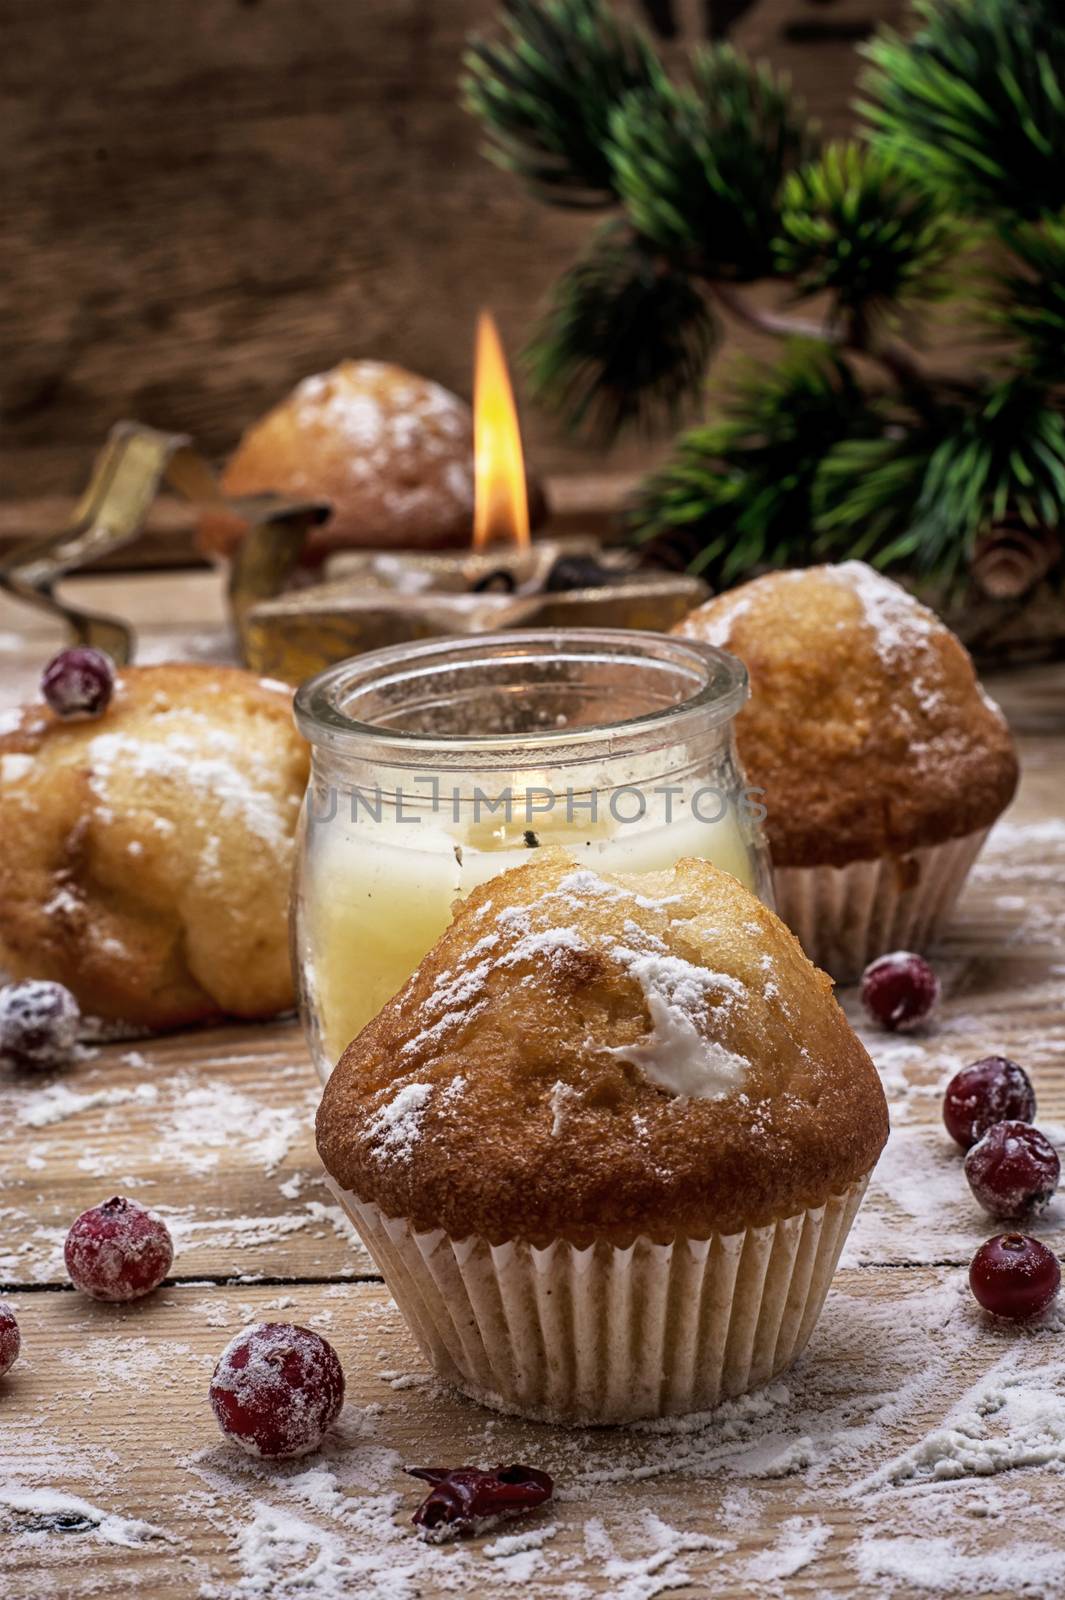 sponge cake and Christmas characters to the new year holiday